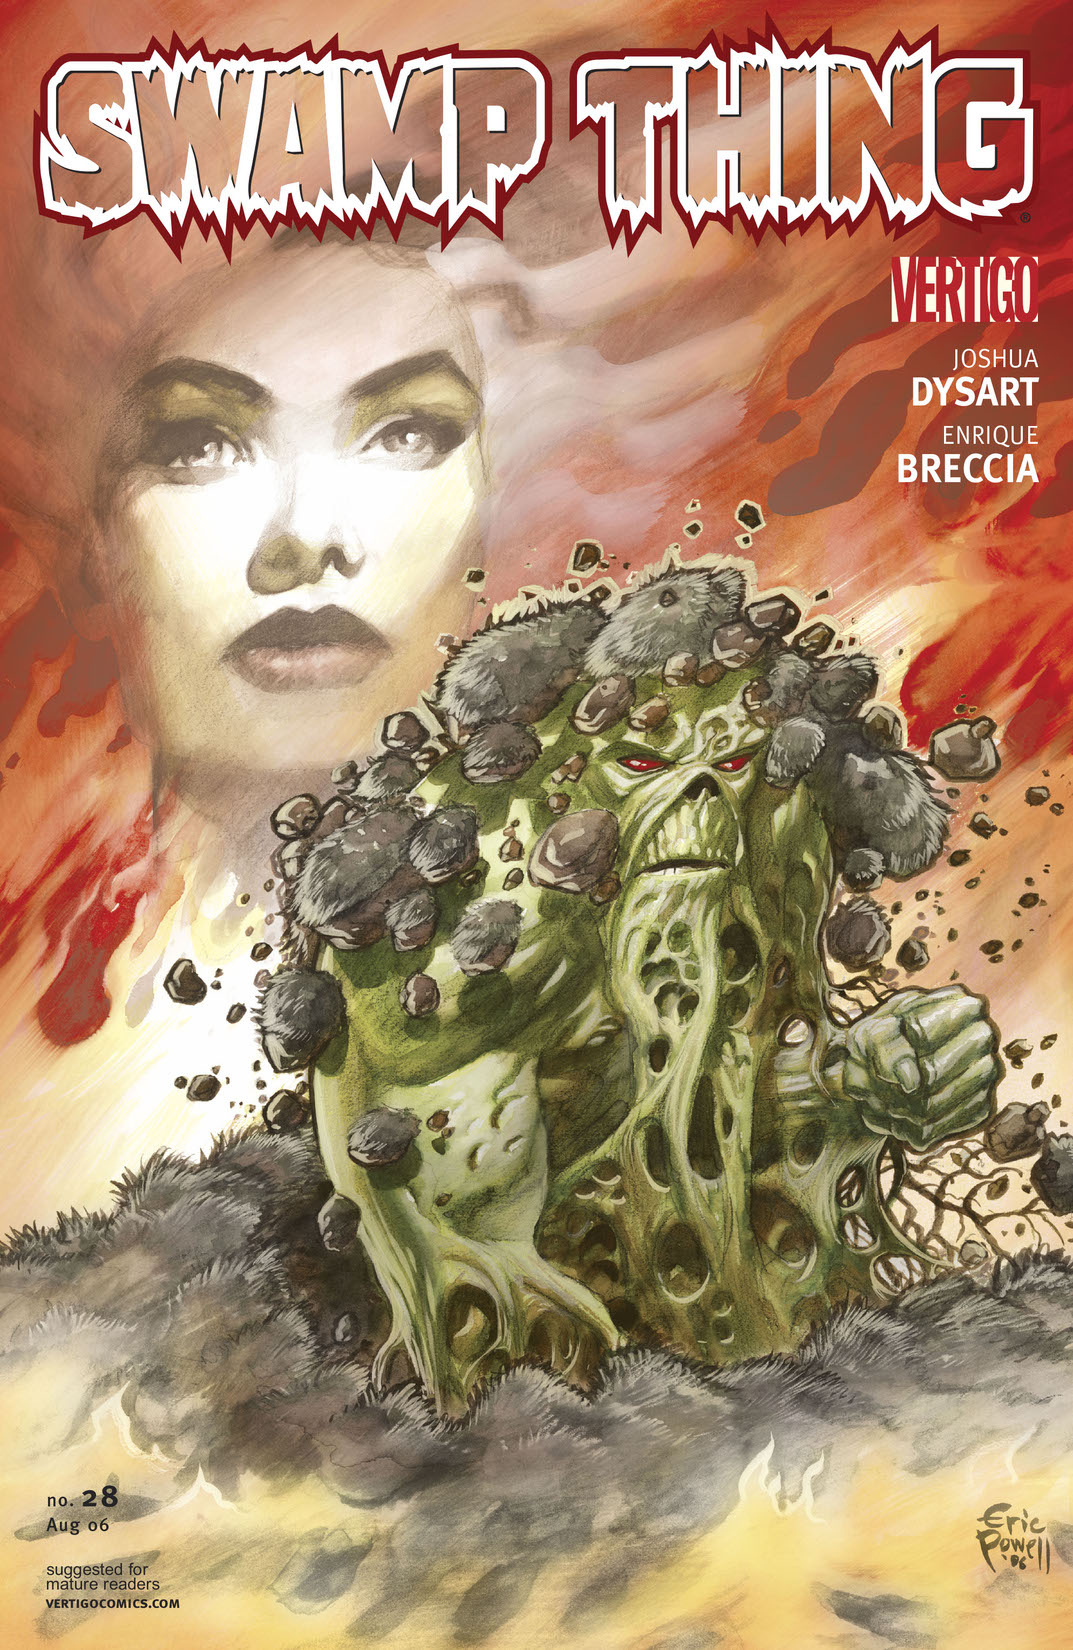 Swamp Thing (2004-) #28 preview images